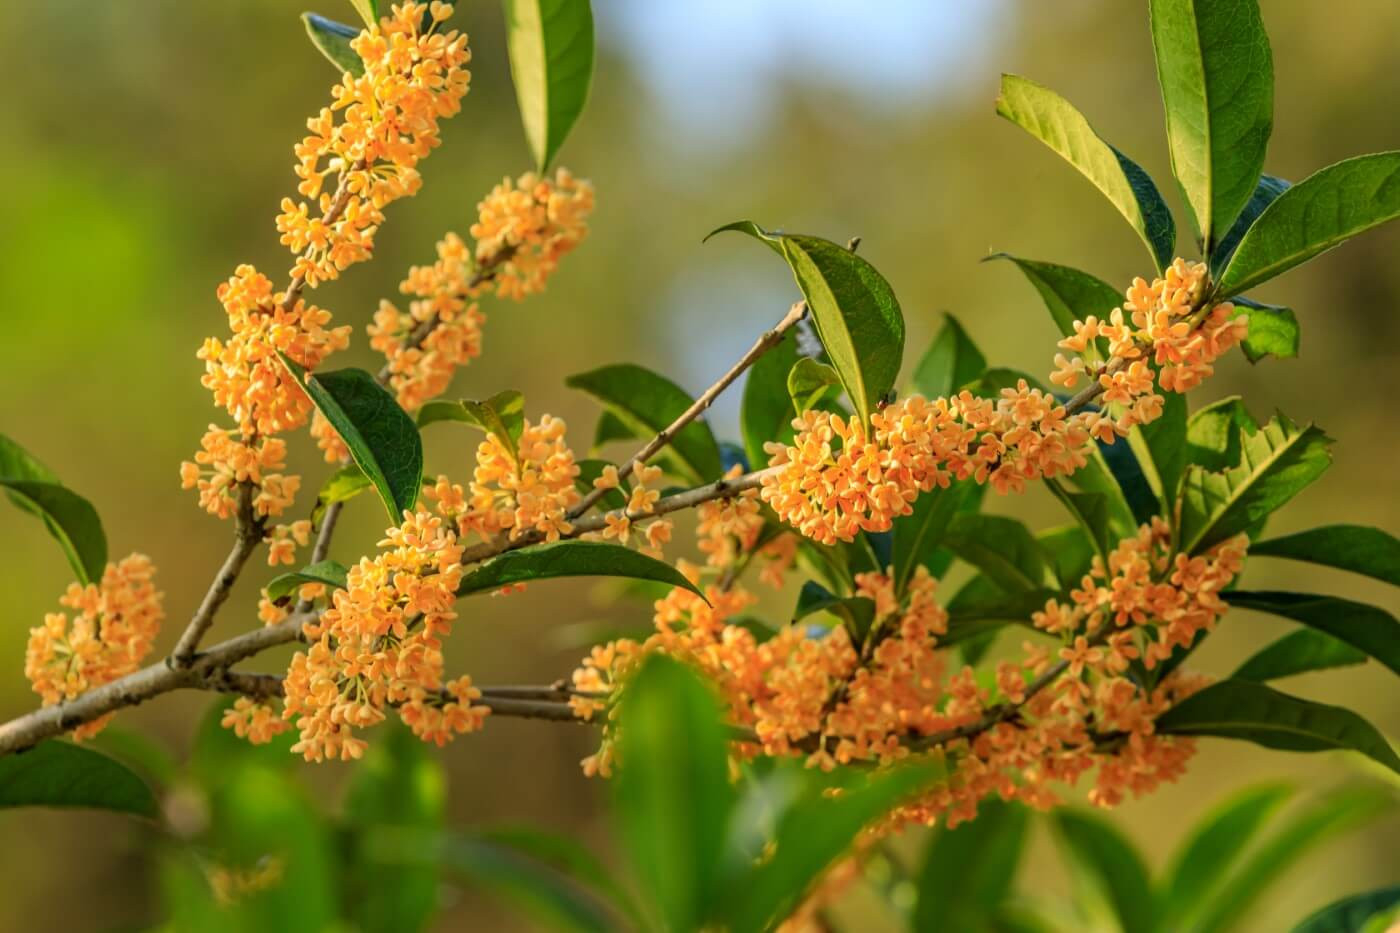 Osmanthus Flower Meaning And Symbolism - Petal Republic